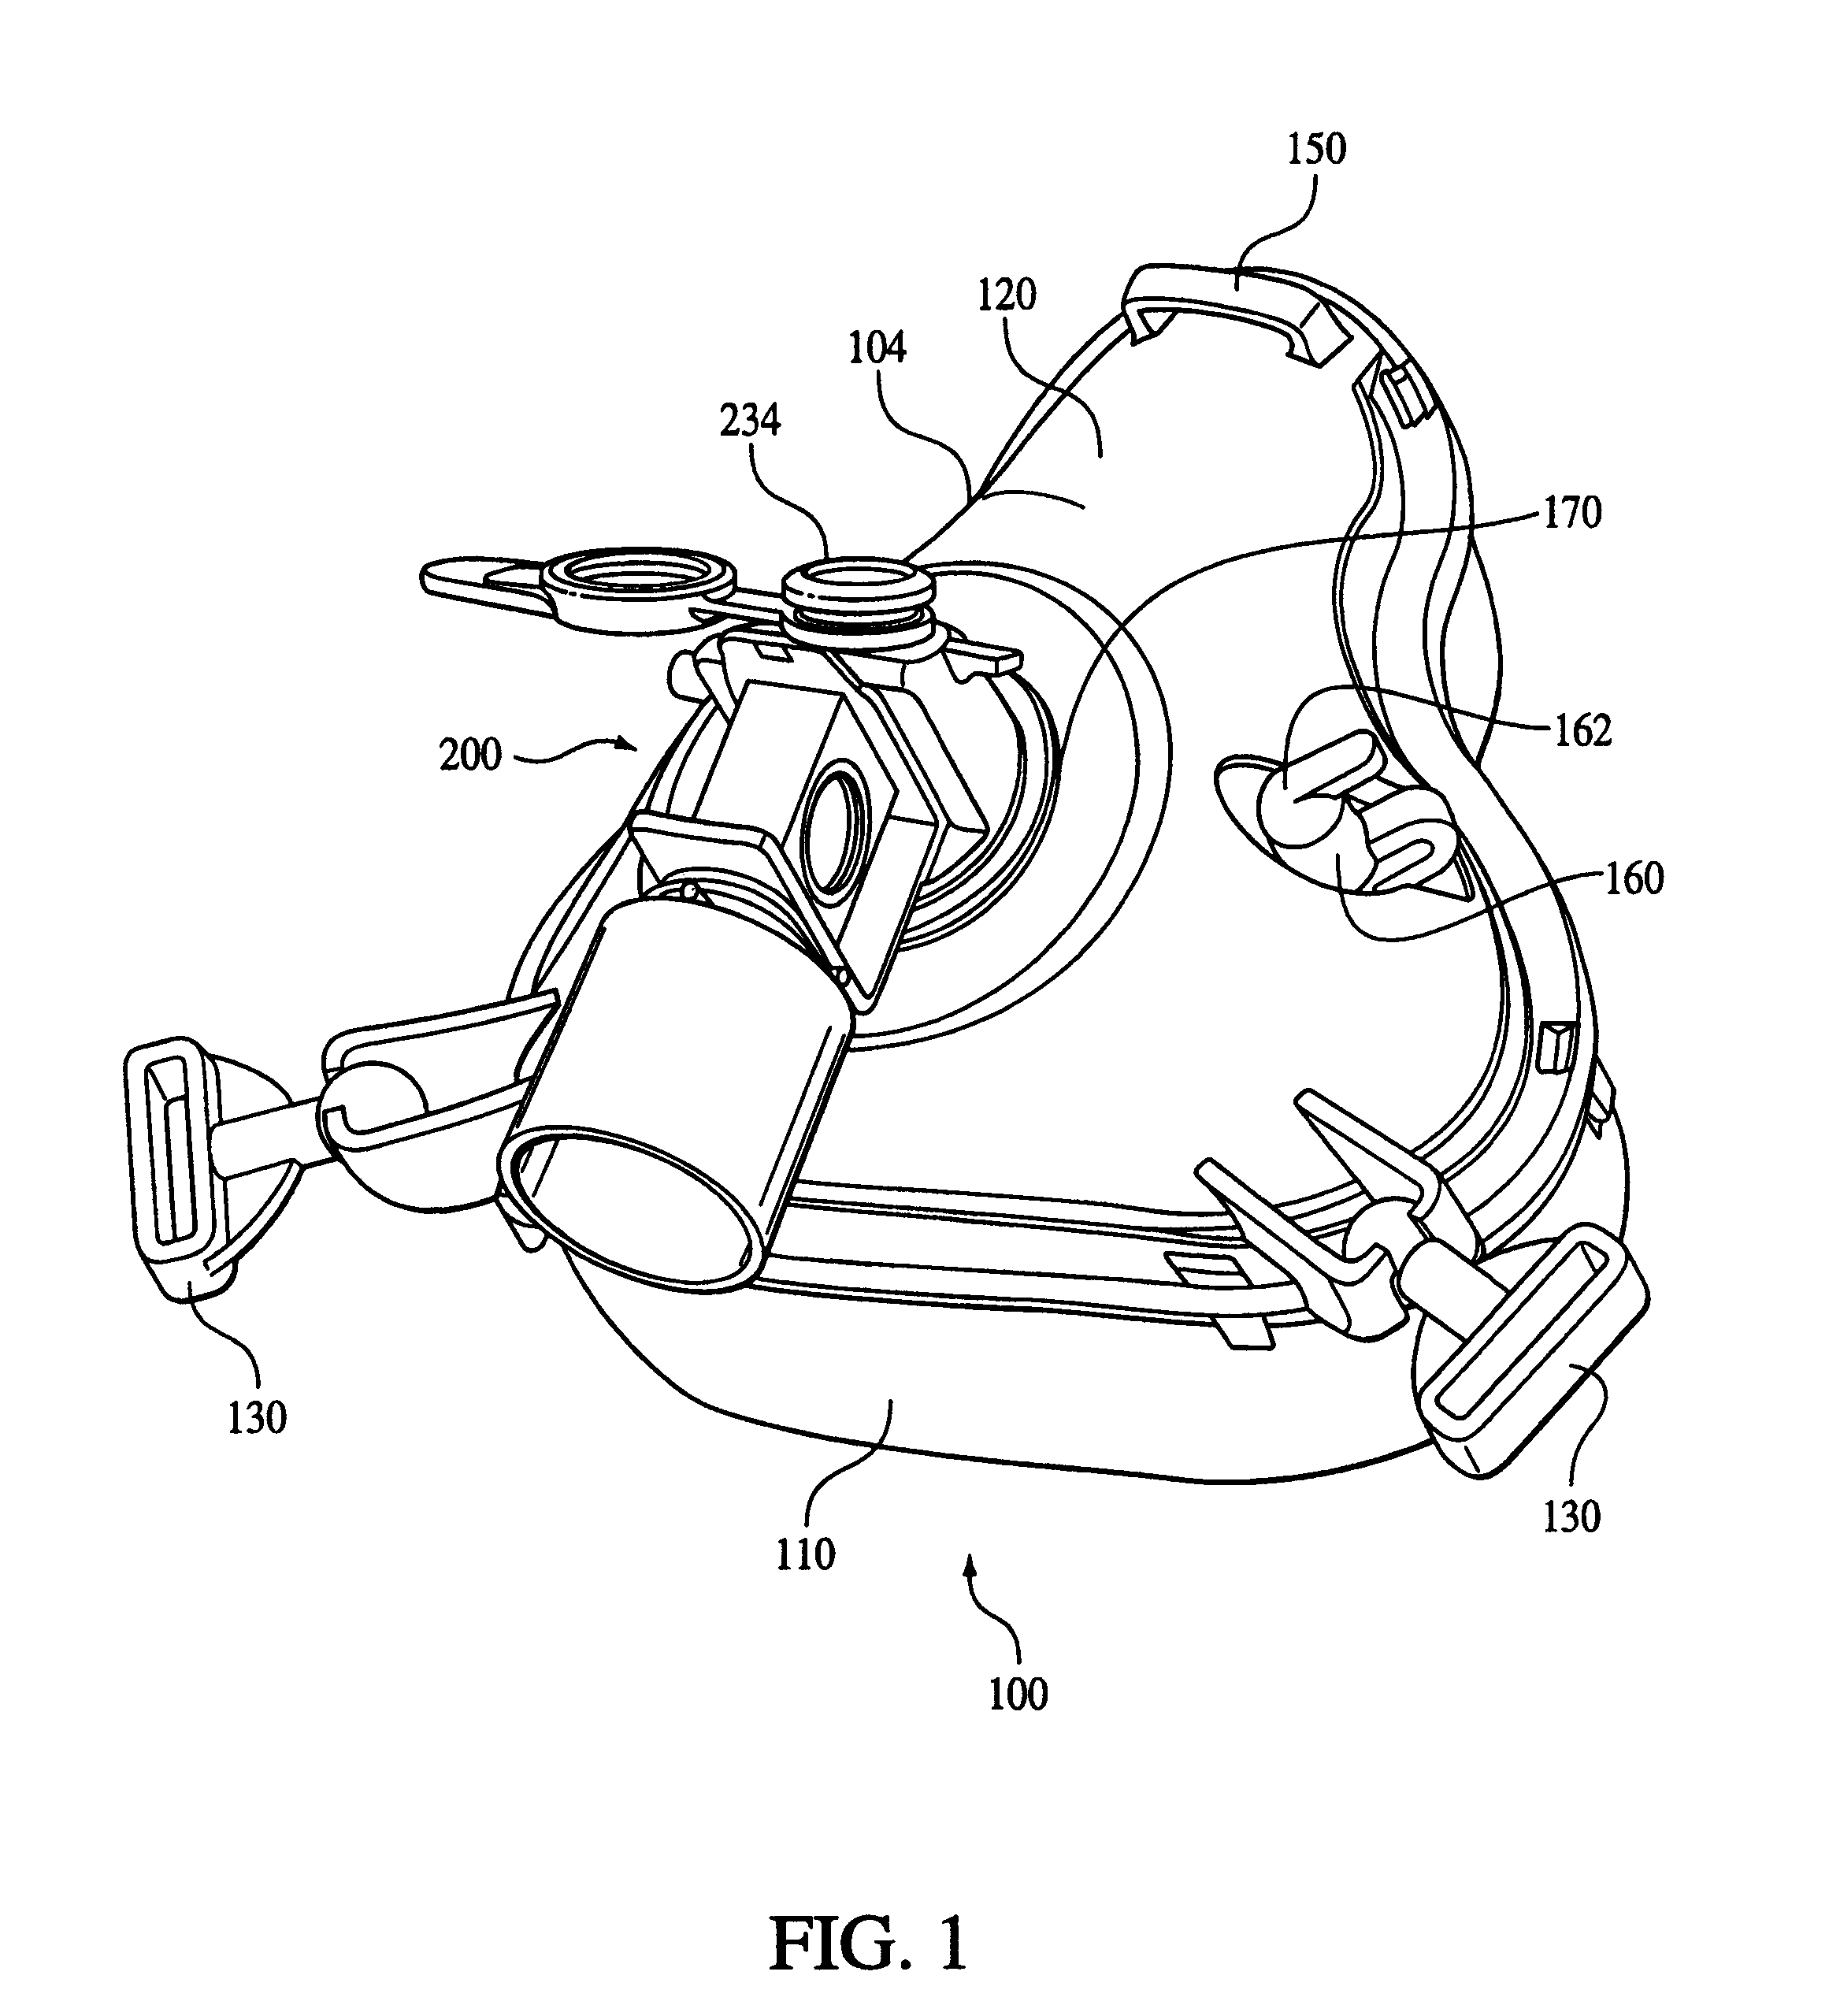 Patient interface with respiratory gas measurement component